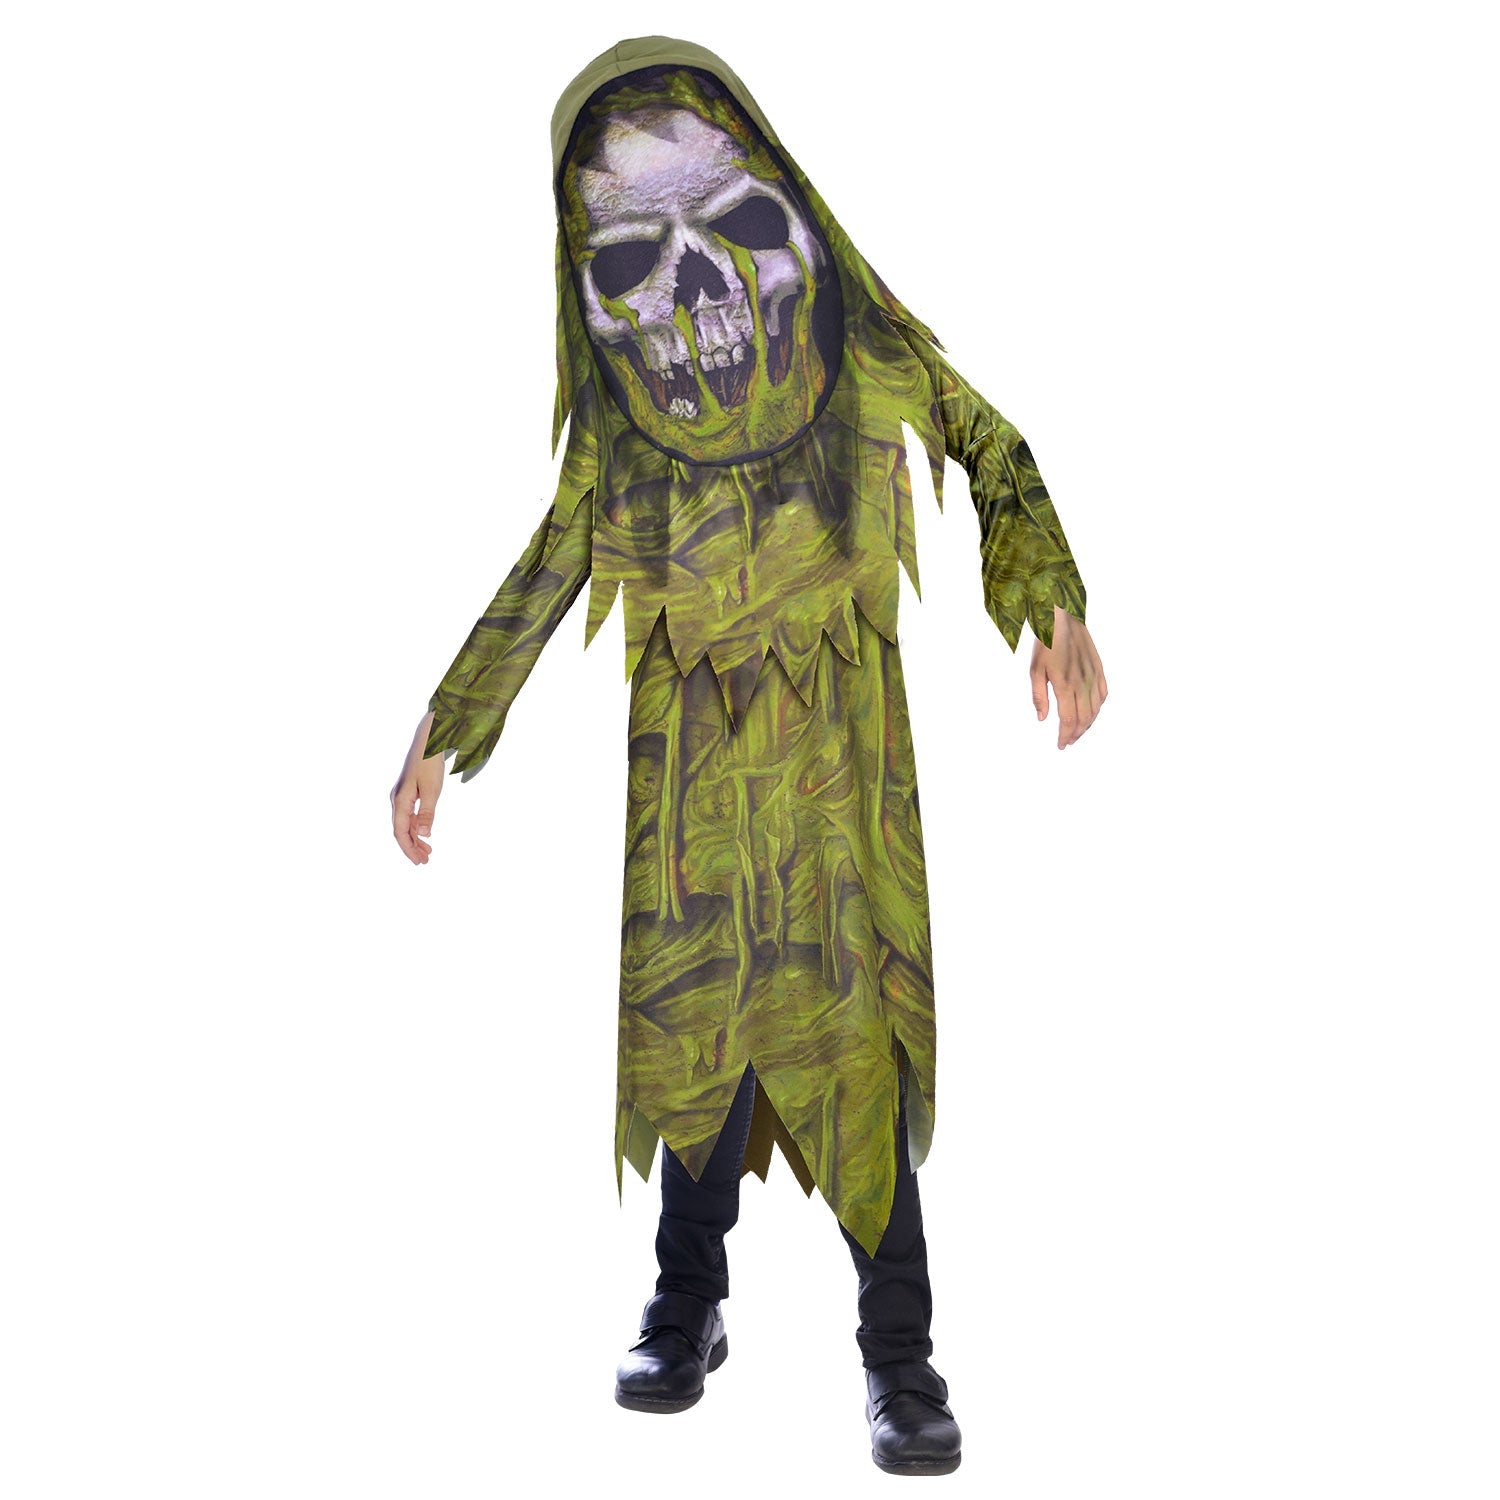 Big Head Swamp Zombie Costume includes robe and hood with mask